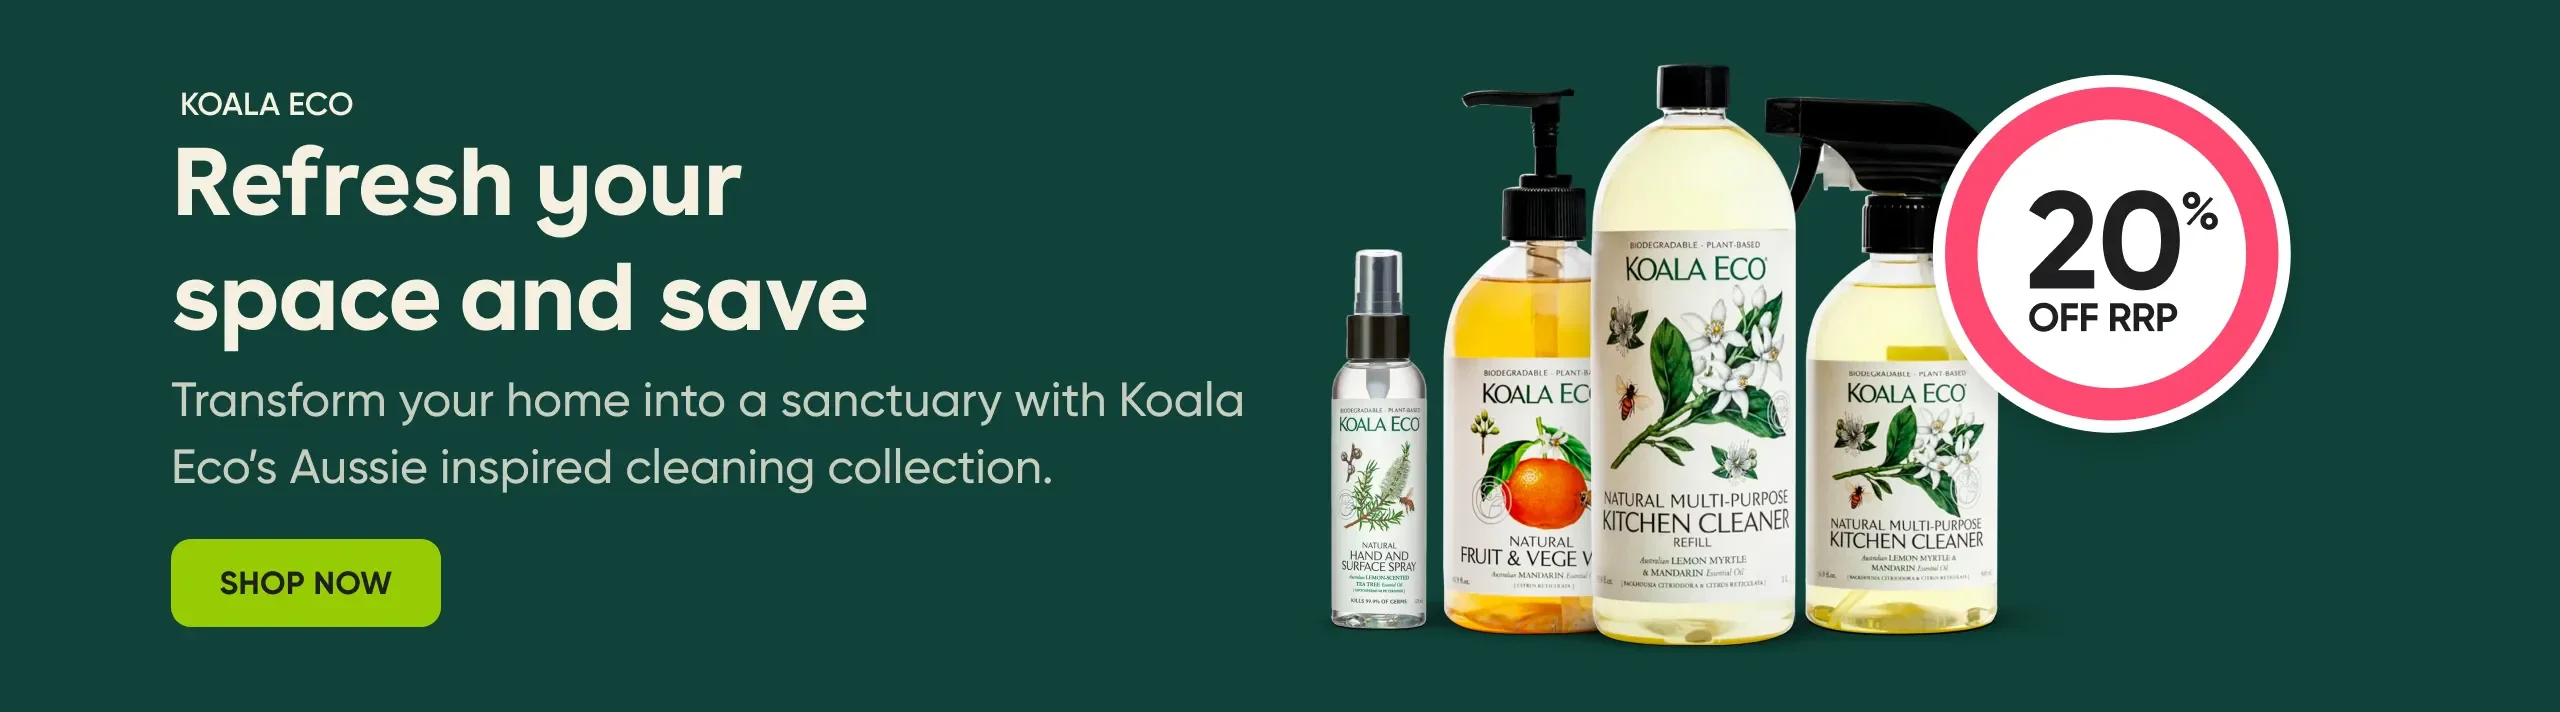 Koala Eco. Refresh your space and save. Transform your home into a sanctuary with Koala Eco’s Aussie inspired cleaning collection.